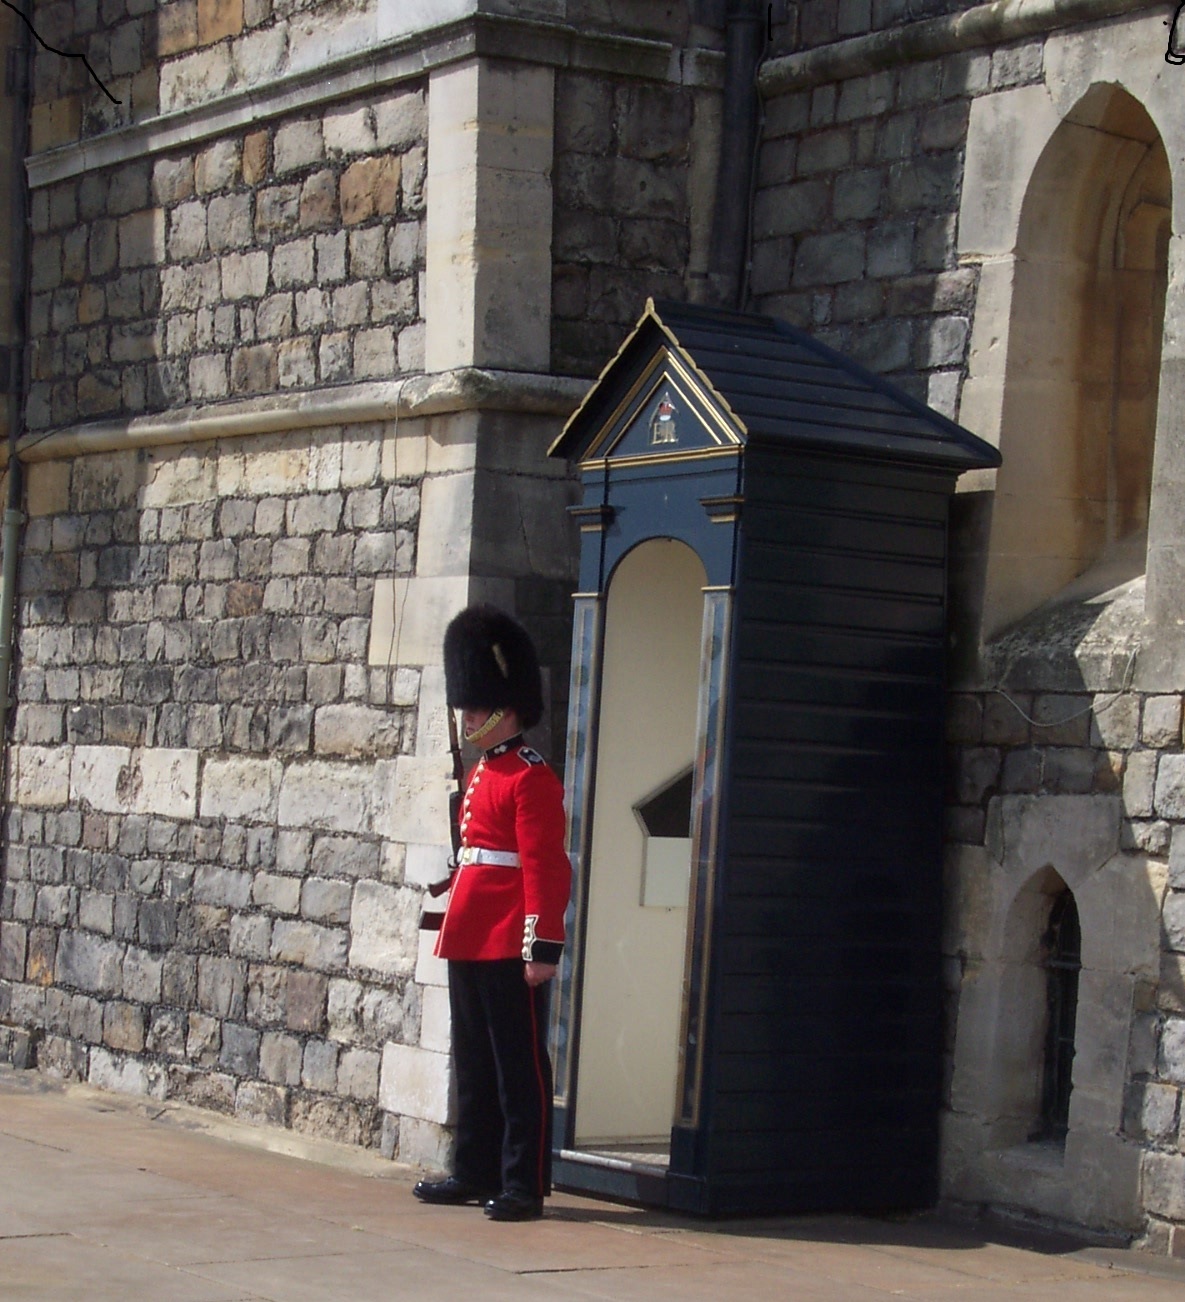 The King’s Guard and The Changing of the Guard – United Kingdom